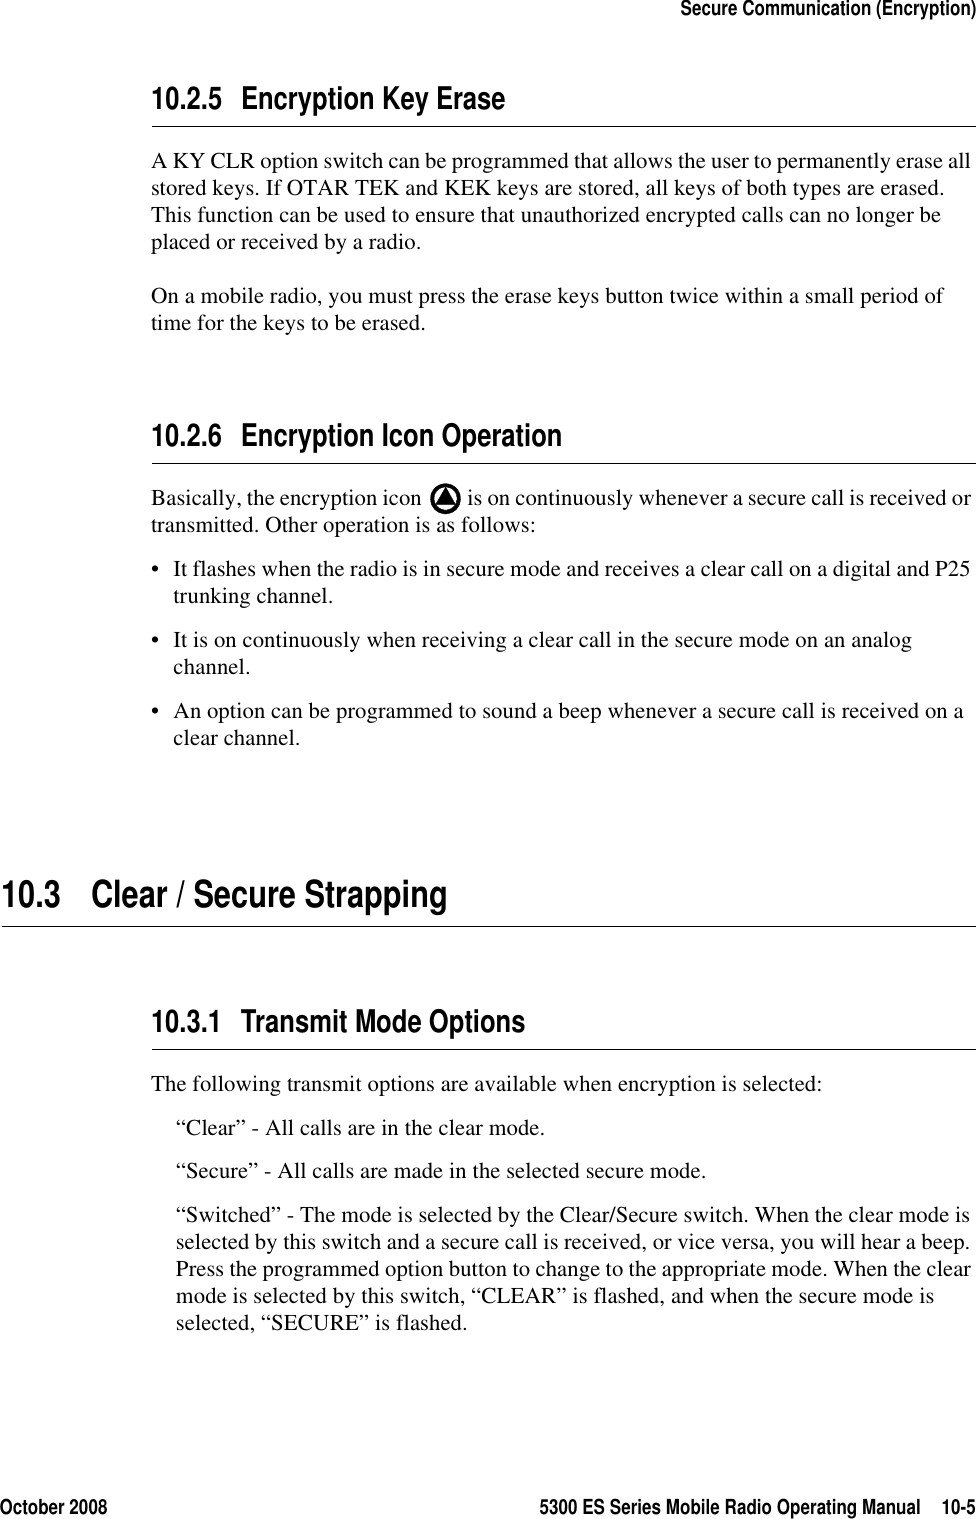 October 2008 5300 ES Series Mobile Radio Operating Manual 10-5Secure Communication (Encryption)10.2.5 Encryption Key EraseA KY CLR option switch can be programmed that allows the user to permanently erase all stored keys. If OTAR TEK and KEK keys are stored, all keys of both types are erased. This function can be used to ensure that unauthorized encrypted calls can no longer be placed or received by a radio.On a mobile radio, you must press the erase keys button twice within a small period of time for the keys to be erased.10.2.6 Encryption Icon OperationBasically, the encryption icon   is on continuously whenever a secure call is received or transmitted. Other operation is as follows:• It flashes when the radio is in secure mode and receives a clear call on a digital and P25 trunking channel.• It is on continuously when receiving a clear call in the secure mode on an analog channel.• An option can be programmed to sound a beep whenever a secure call is received on a clear channel.10.3 Clear / Secure Strapping10.3.1 Transmit Mode OptionsThe following transmit options are available when encryption is selected:“Clear” - All calls are in the clear mode.“Secure” - All calls are made in the selected secure mode.“Switched” - The mode is selected by the Clear/Secure switch. When the clear mode is selected by this switch and a secure call is received, or vice versa, you will hear a beep. Press the programmed option button to change to the appropriate mode. When the clear mode is selected by this switch, “CLEAR” is flashed, and when the secure mode is selected, “SECURE” is flashed.